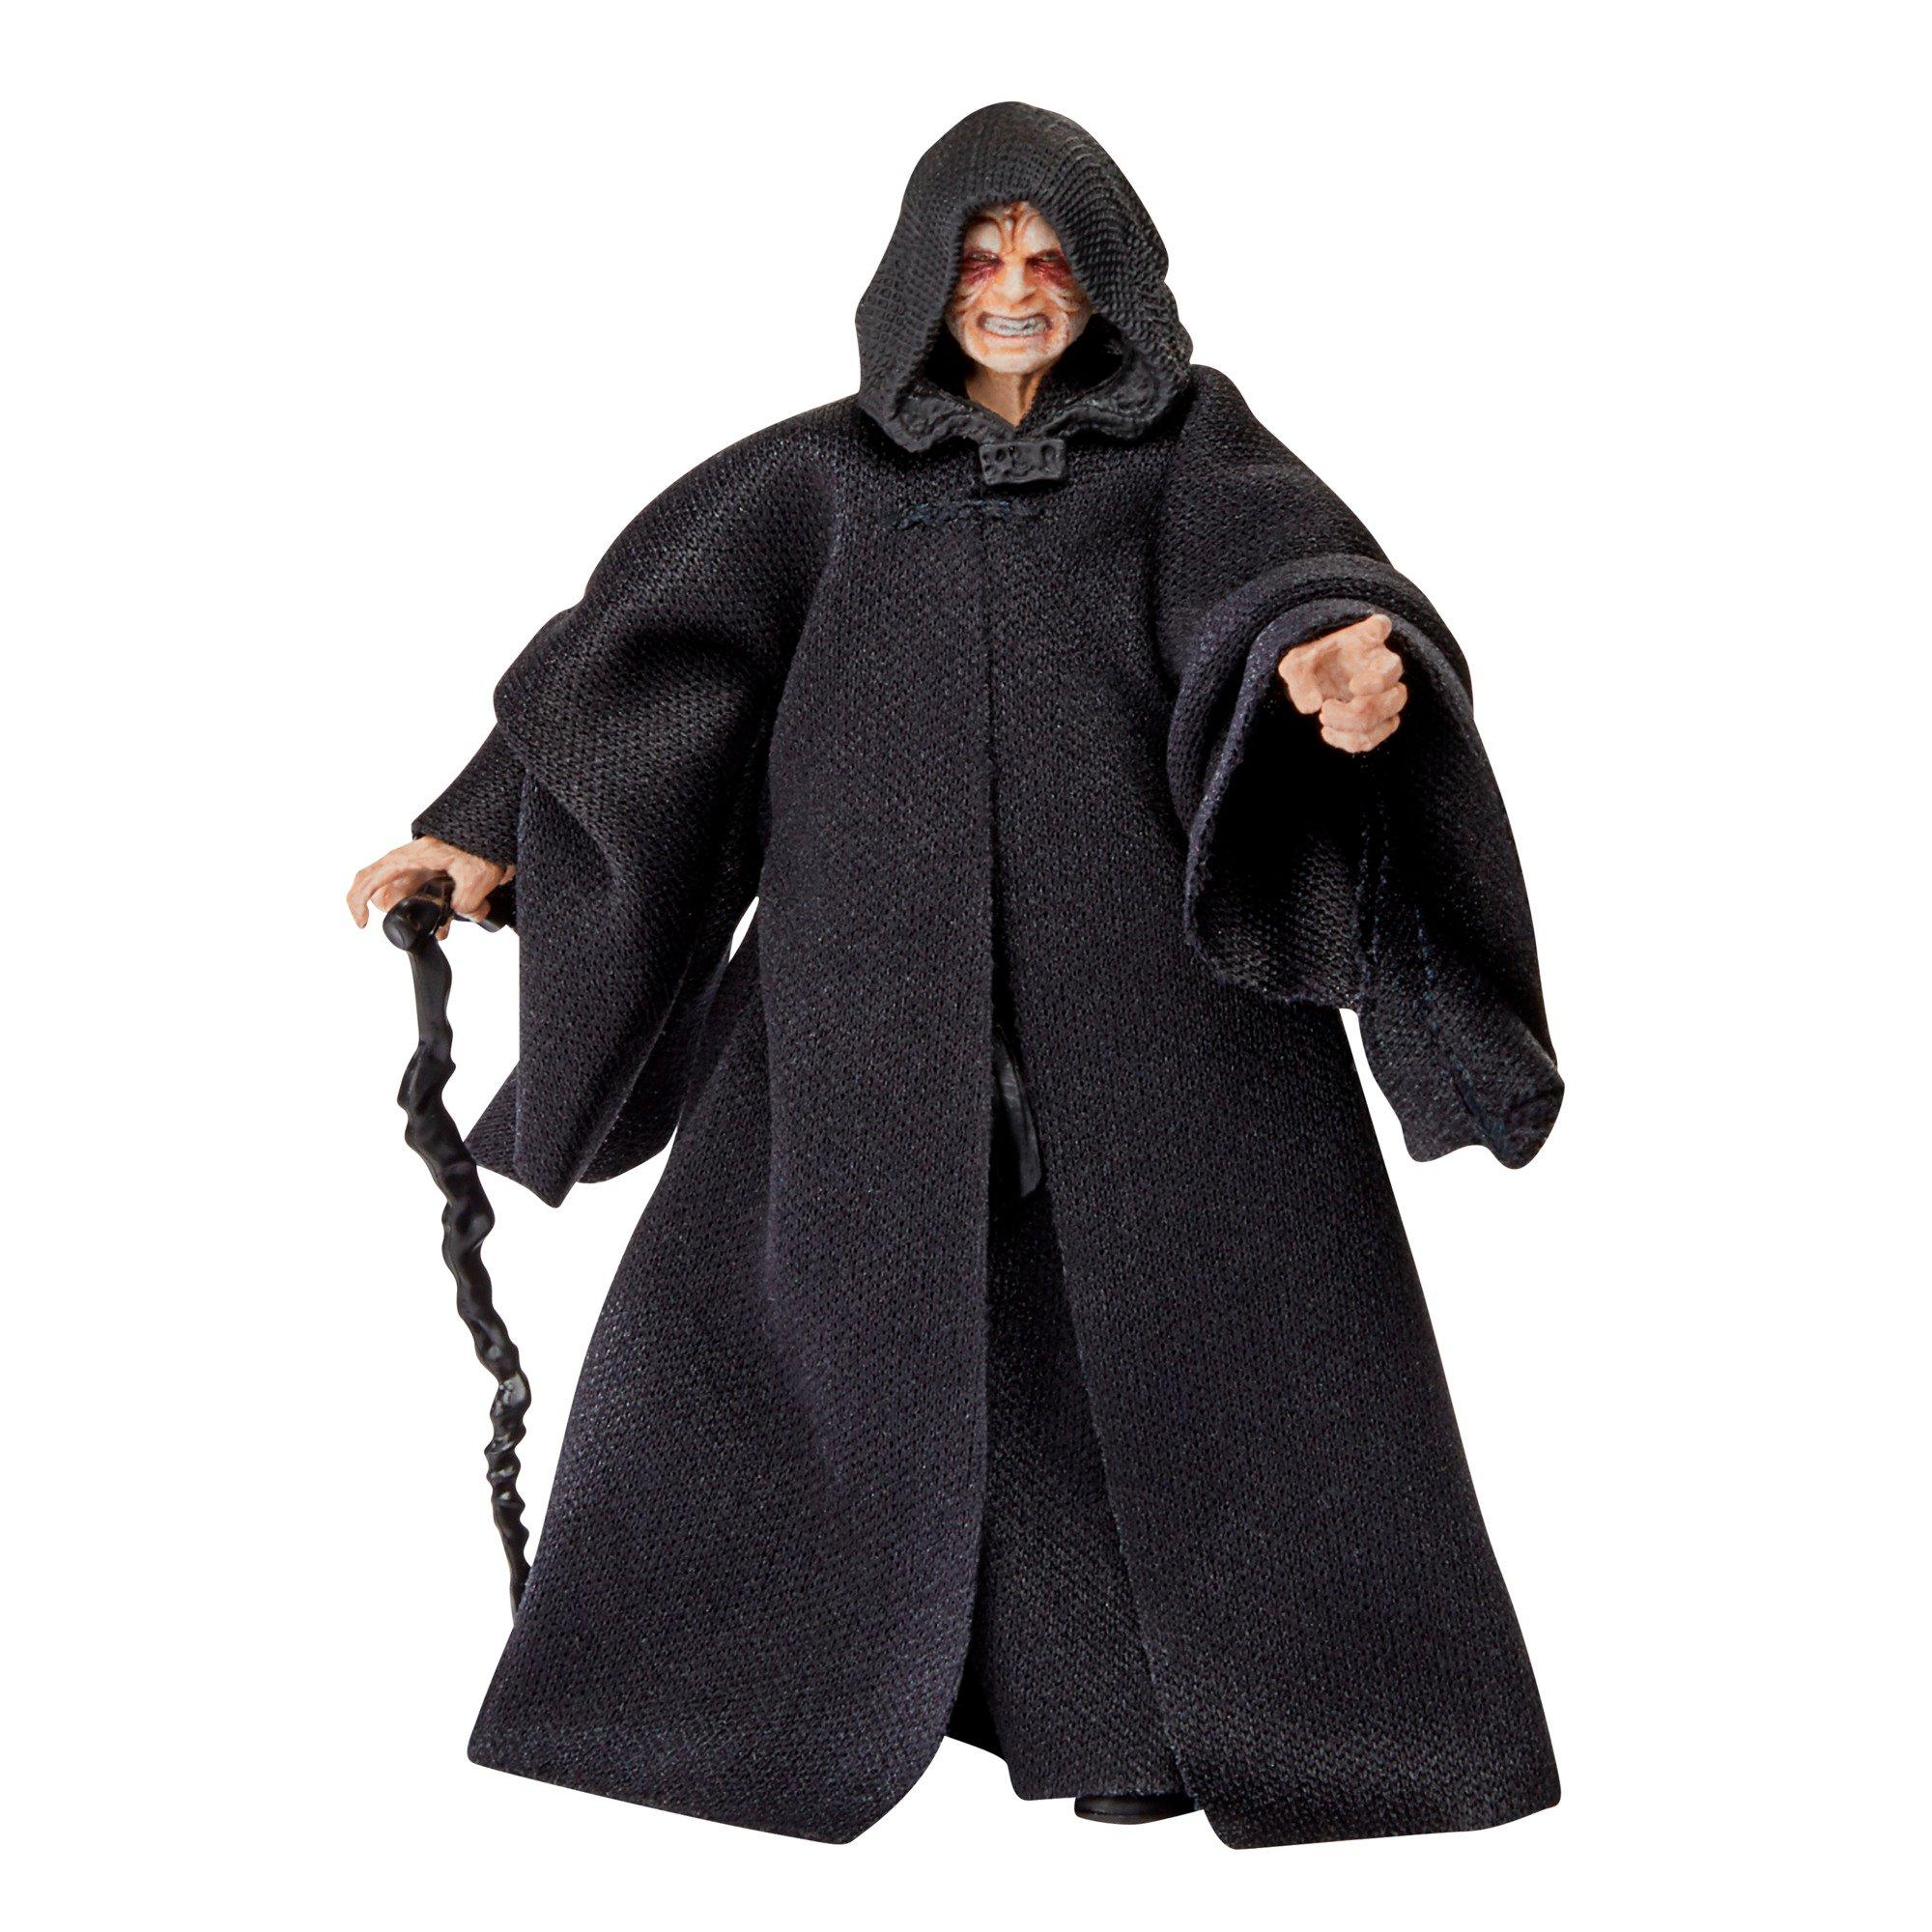 list item 1 of 4 Kenner The Vintage Collection Star Wars Return of the Jedi The Emperor Action Figure